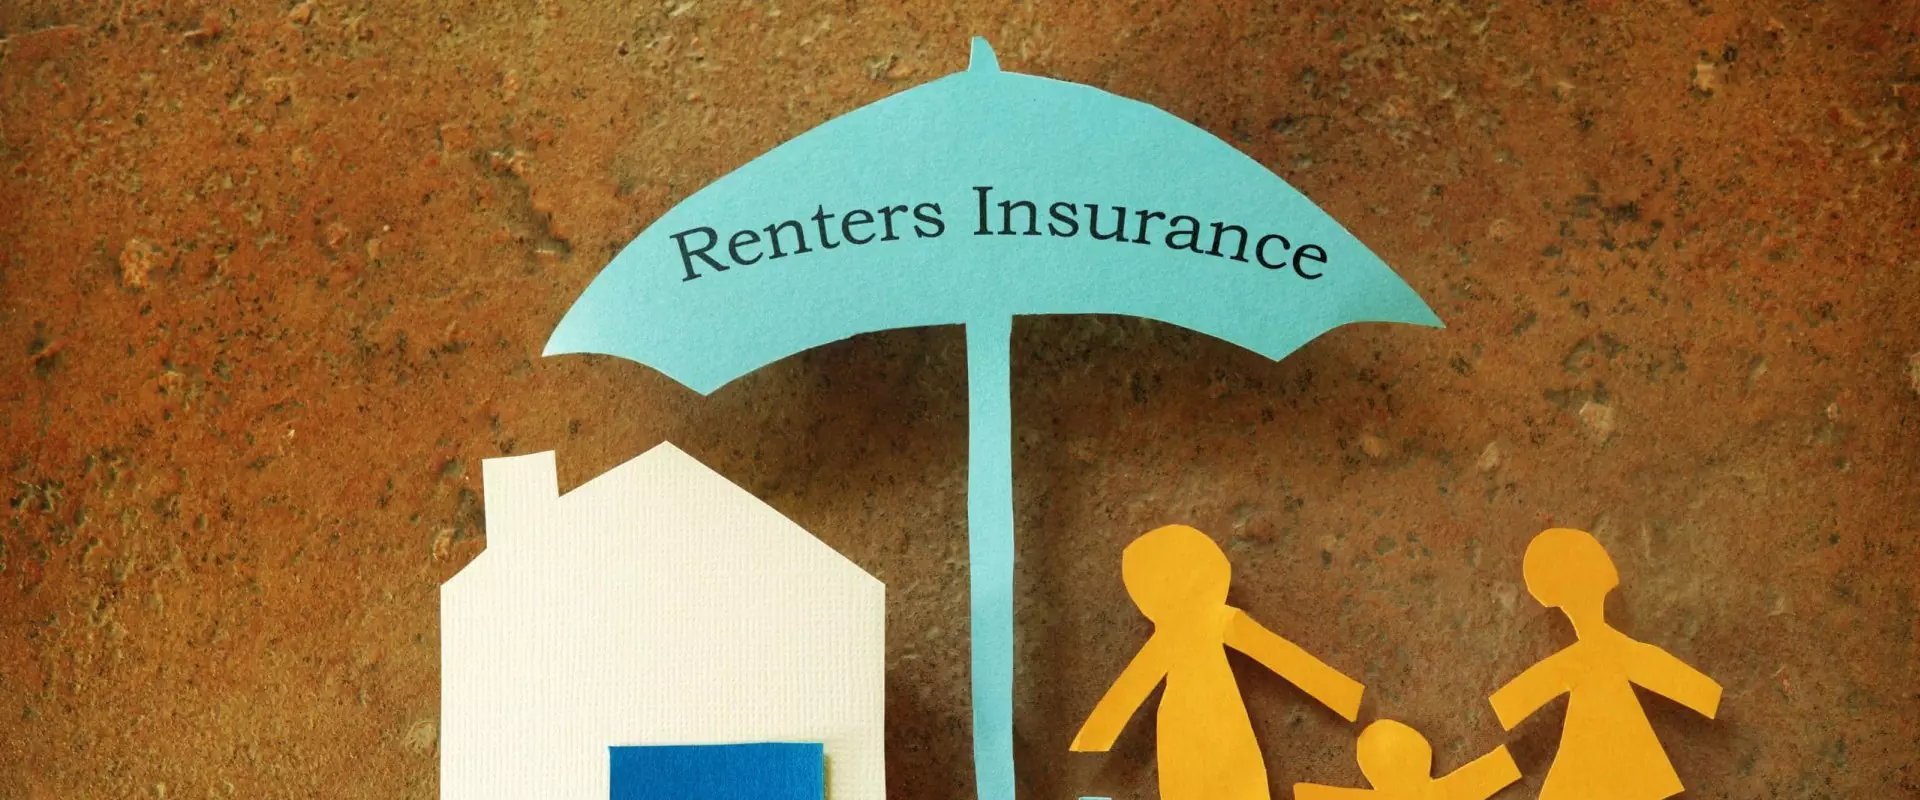 How much should renter’s insurance cost per month?